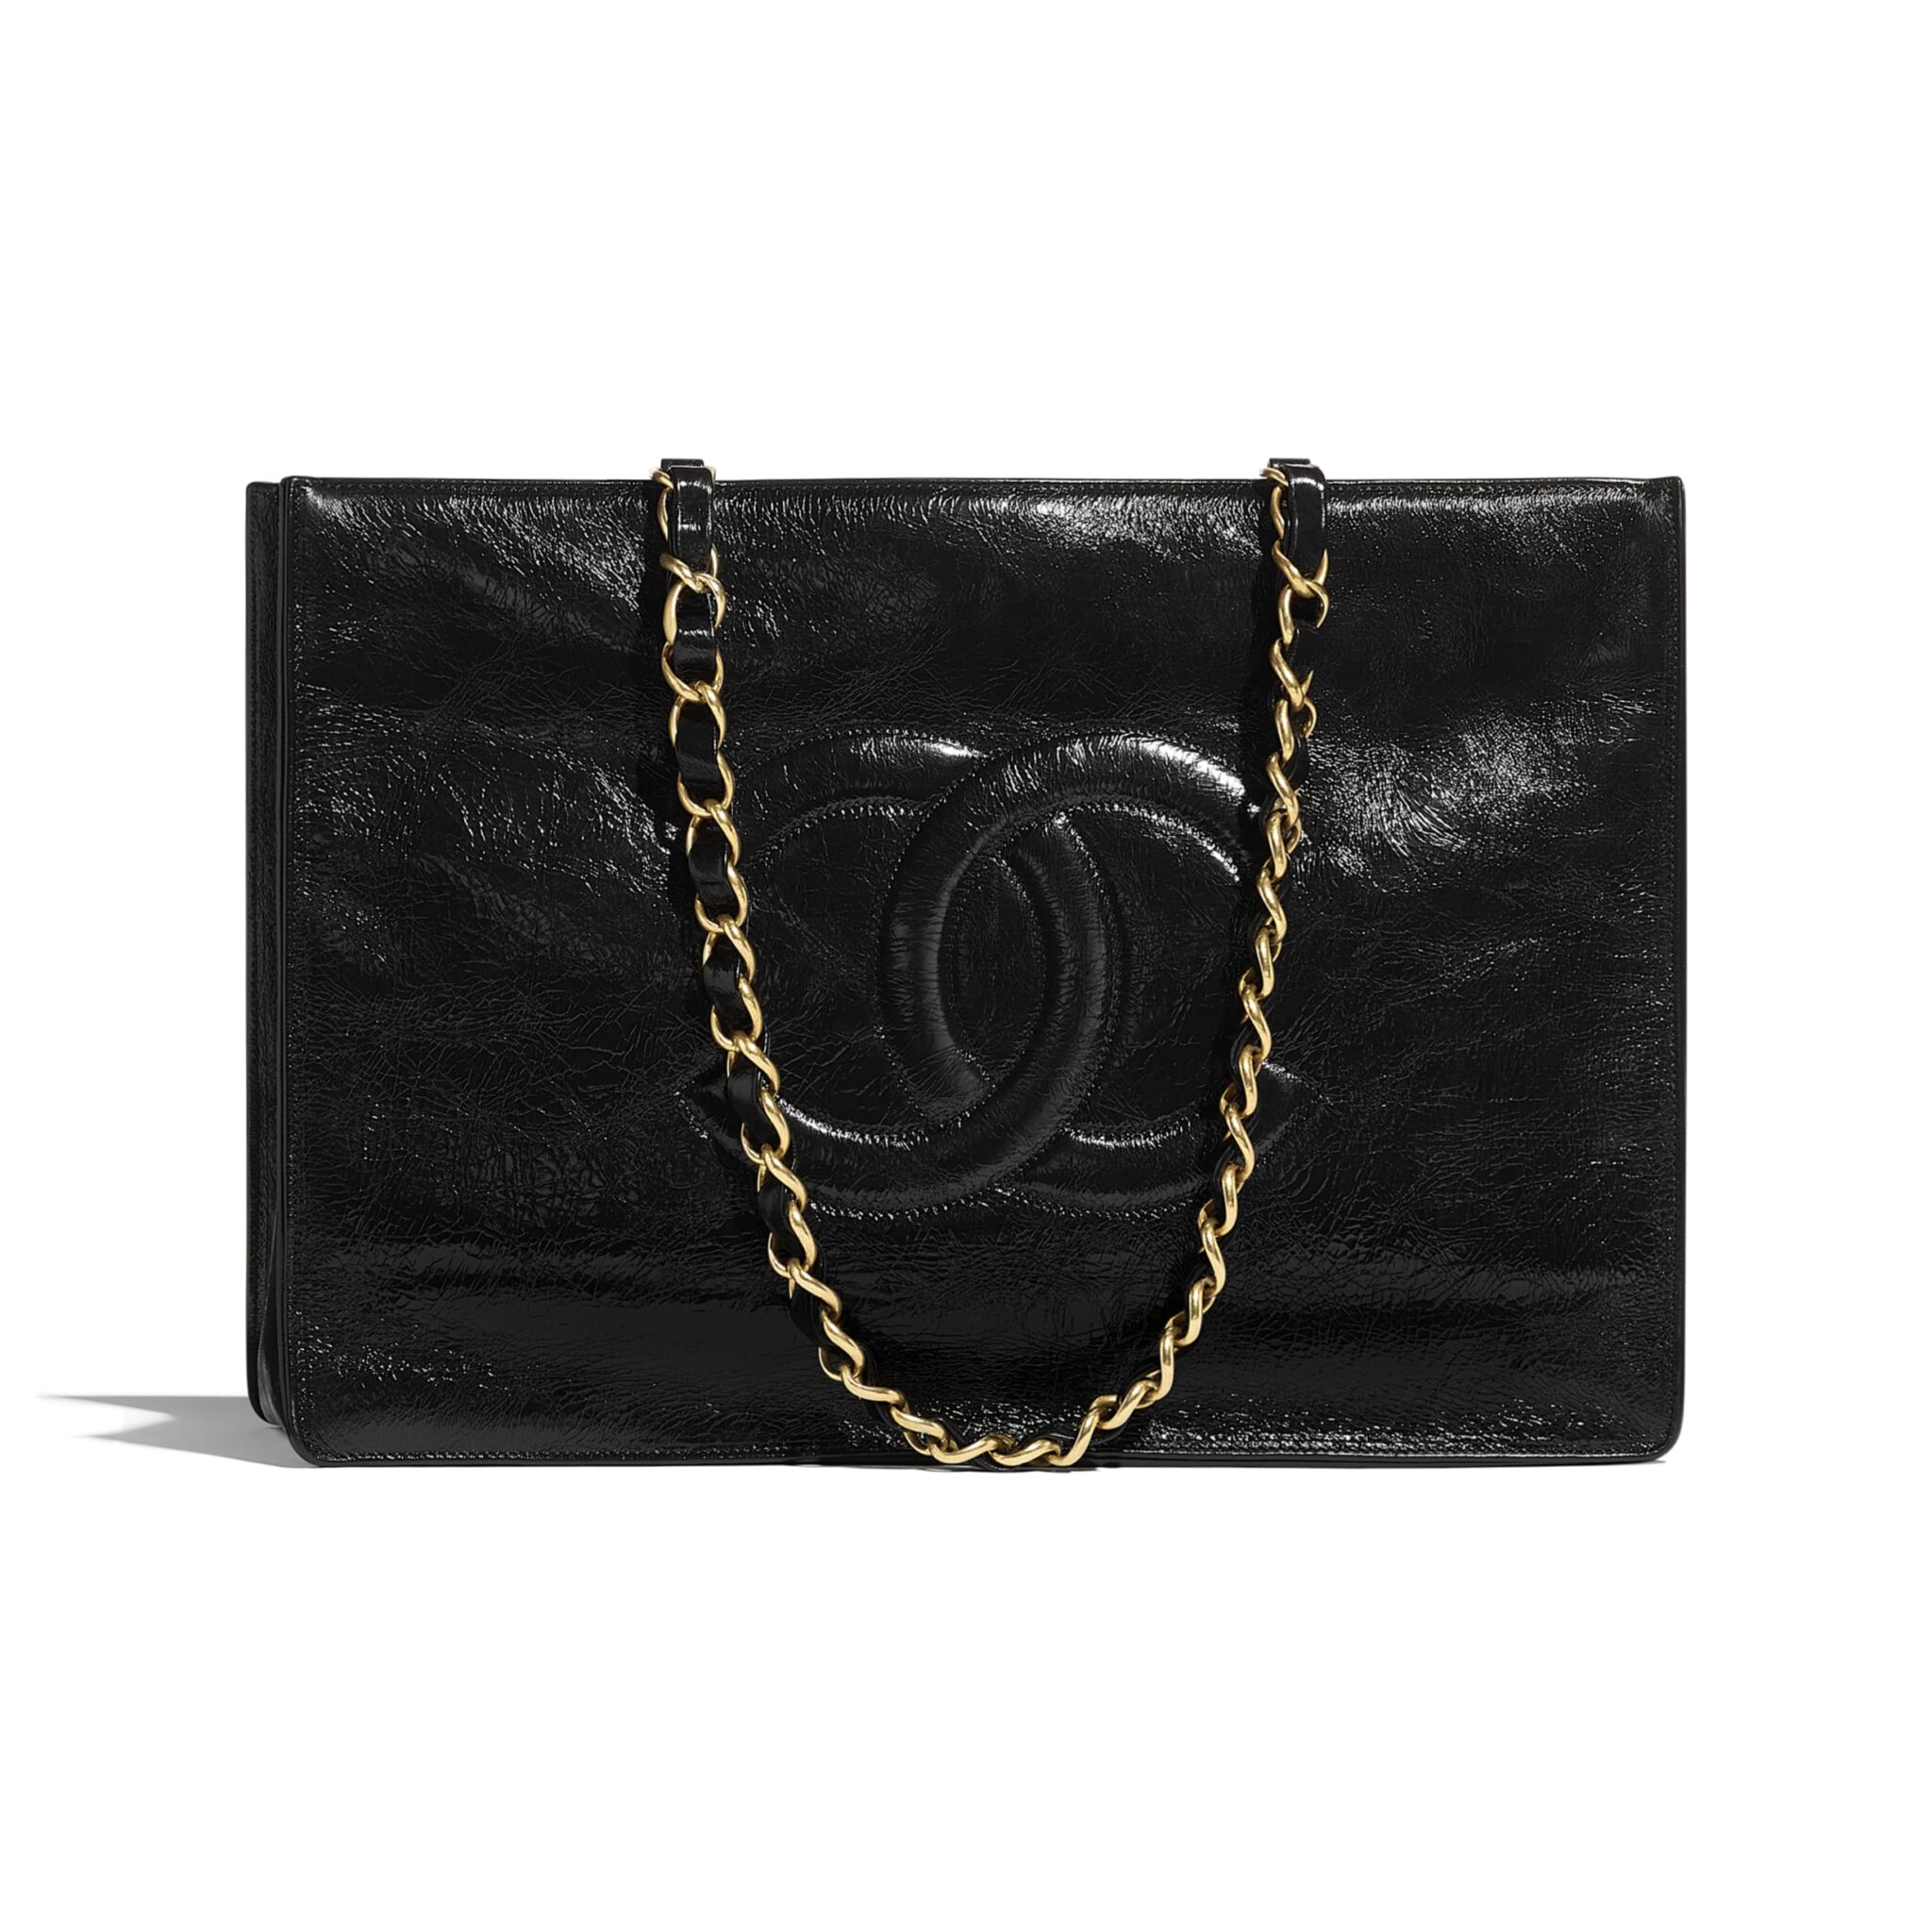 CHANEL Shiny Crumpled Calfskin Quilted Medium Chanel 19 Flap Black 1267067   FASHIONPHILE